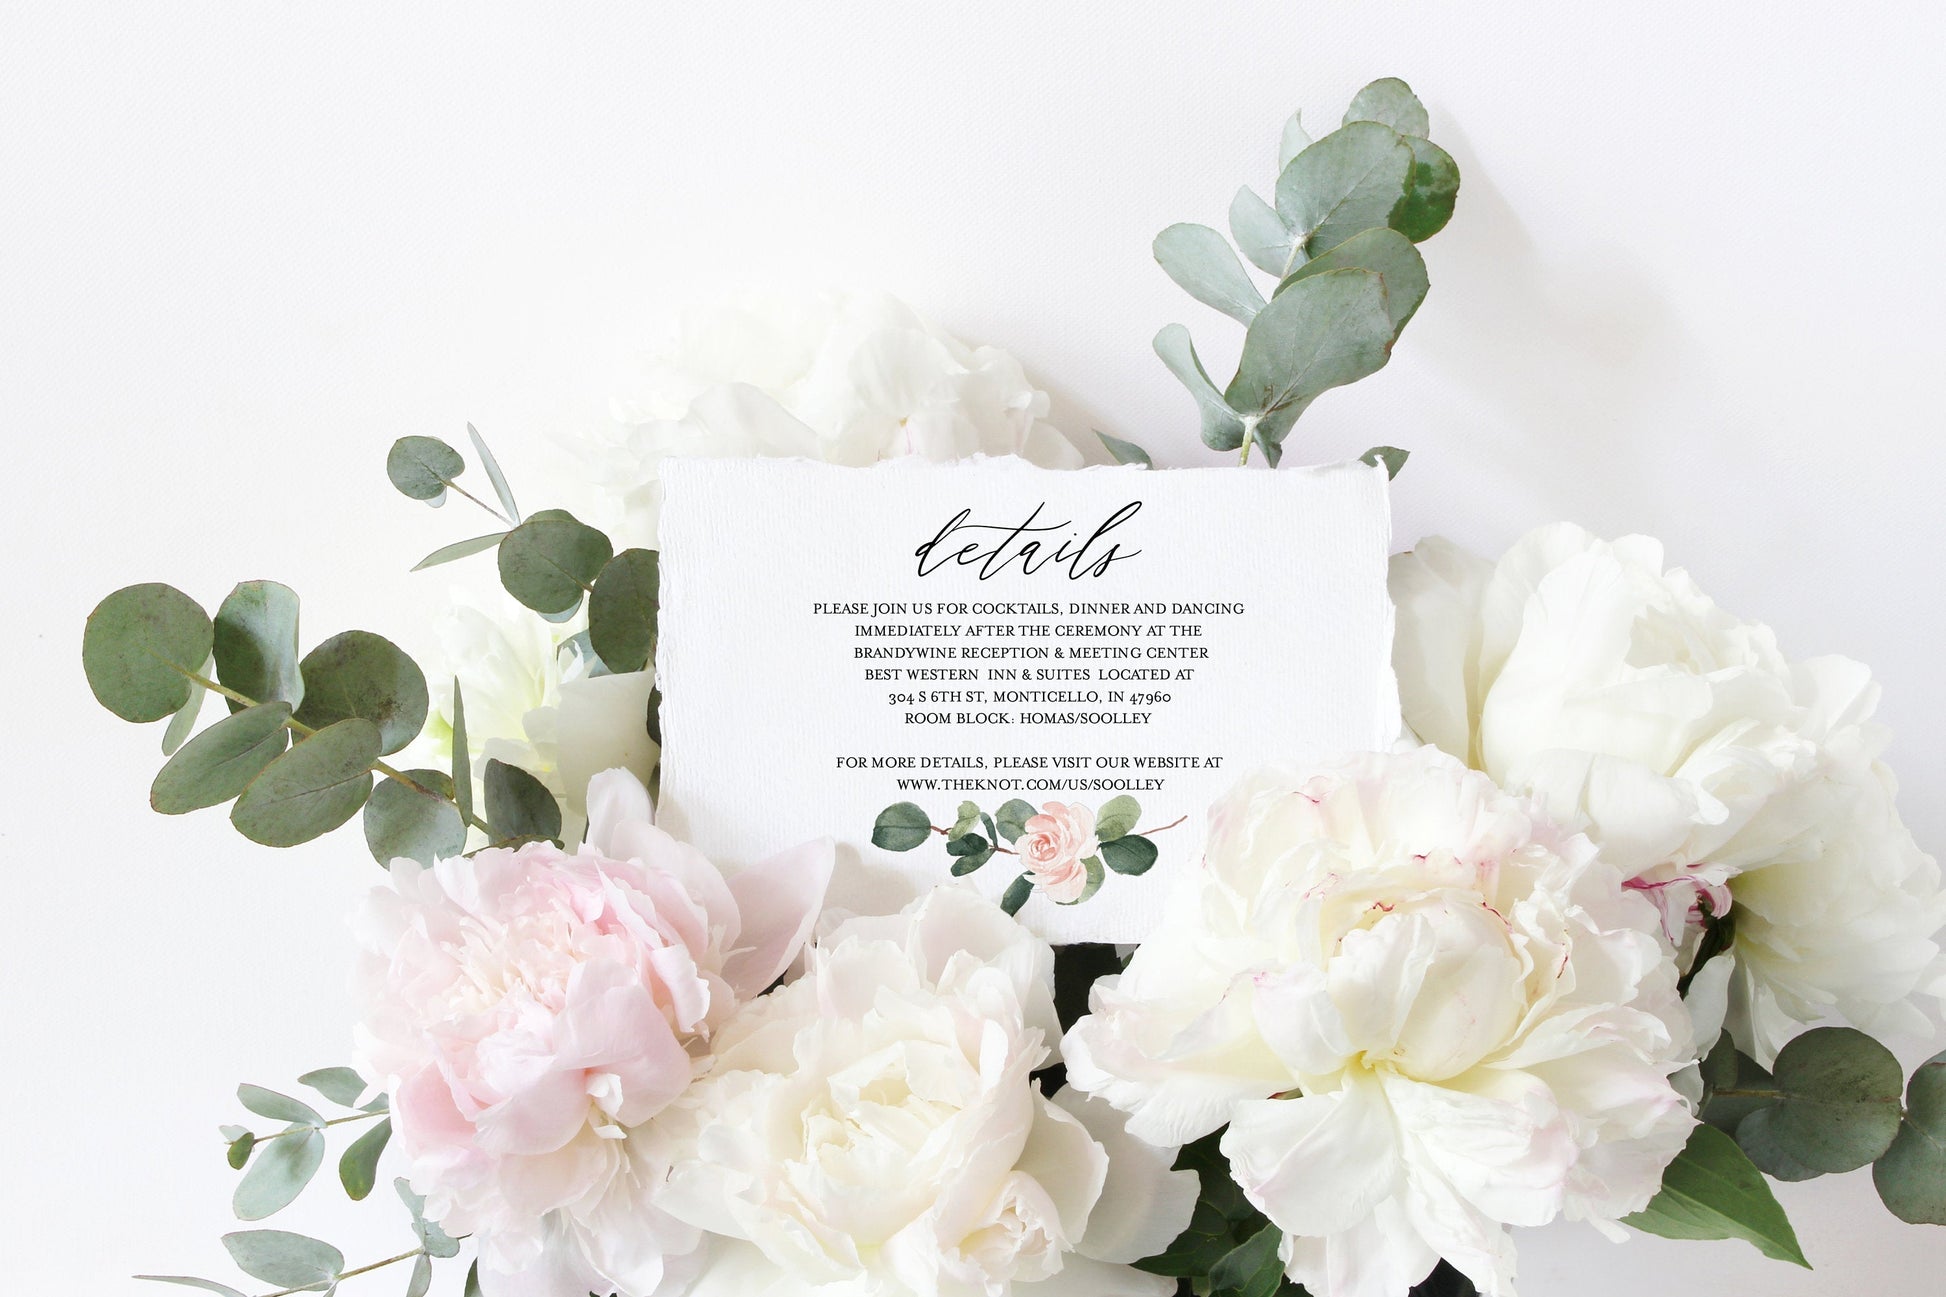 Wedding Details Card Template Instant Download Information Card Wedding Info Card Greenery Wedding Details Template  - Scarlett RSVP & DETAILS CARDS SAVVY PAPER CO